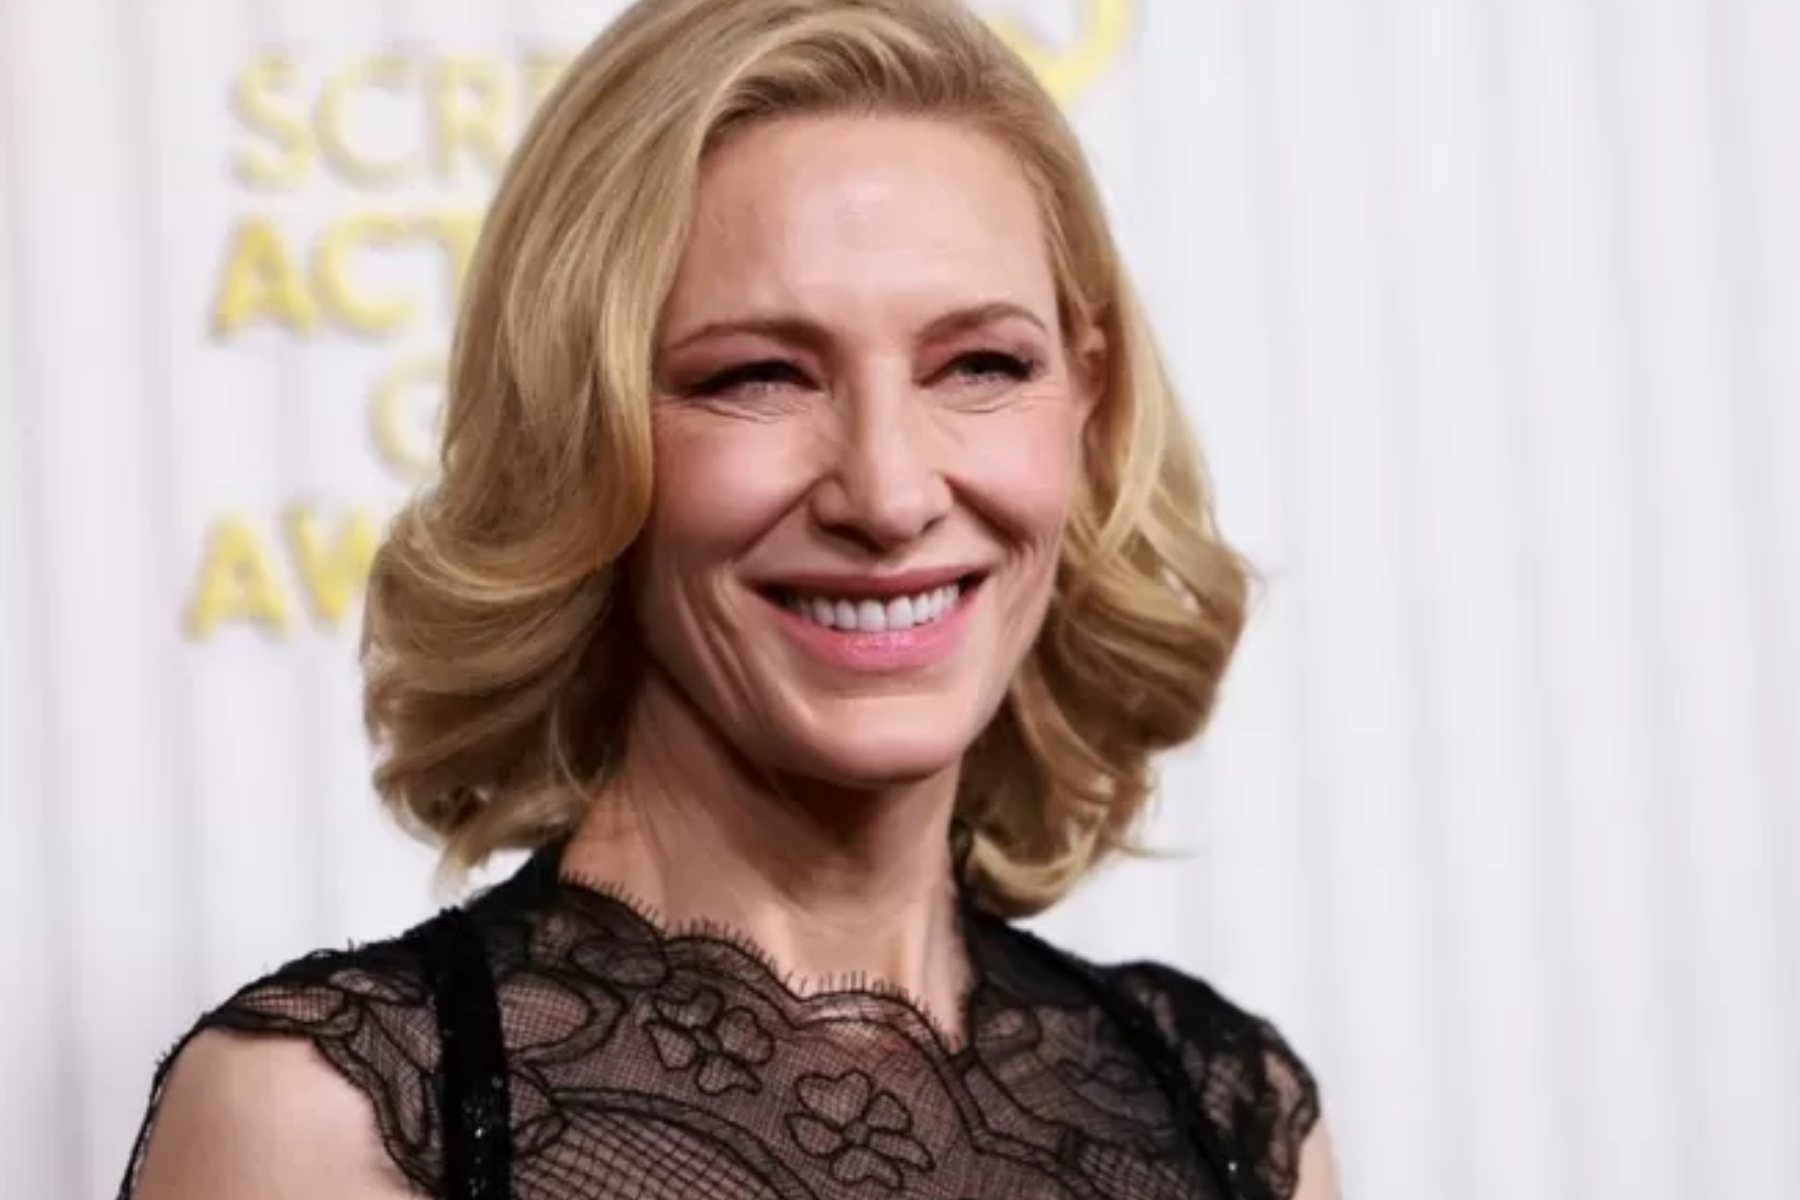 Cate Blanchett is nominated for best leading actress for her performance in Tár